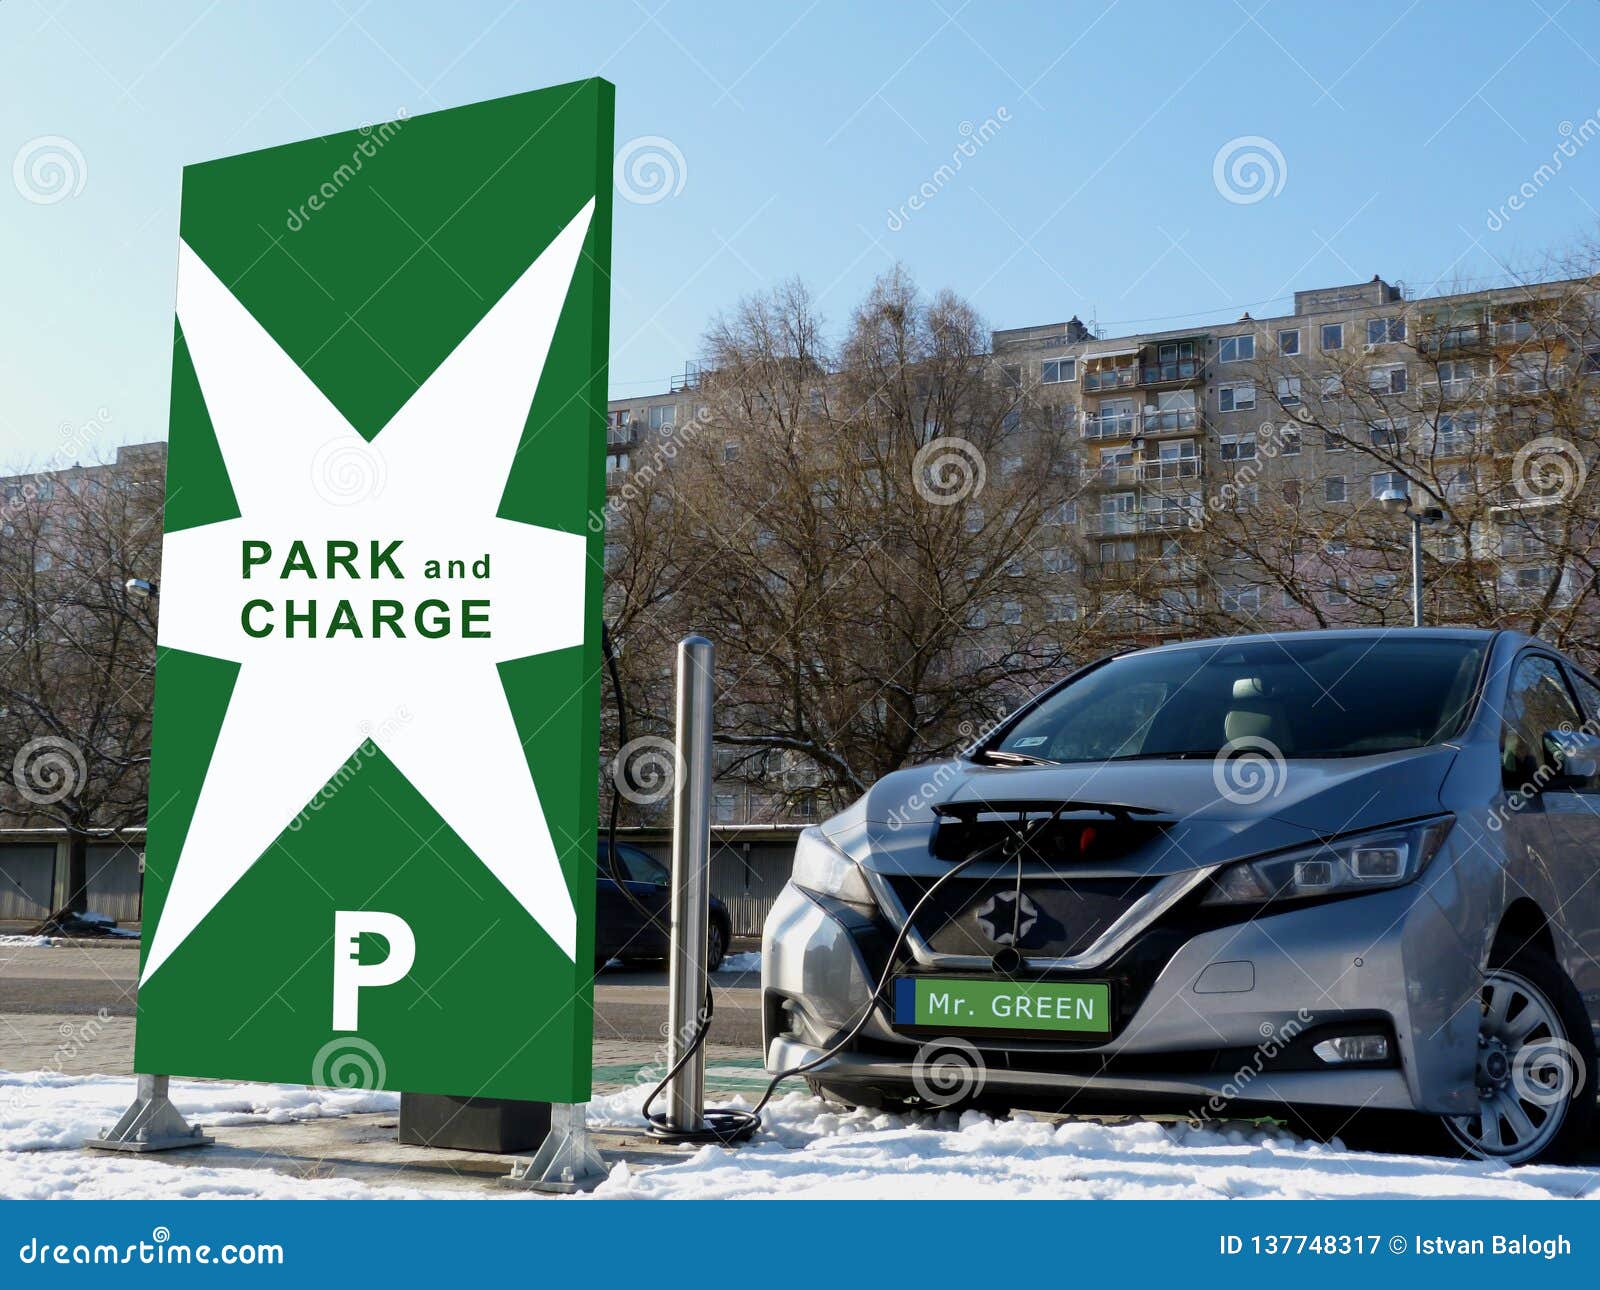 Electric Car Charging Station in Green Parking Lot Stock Image - Image